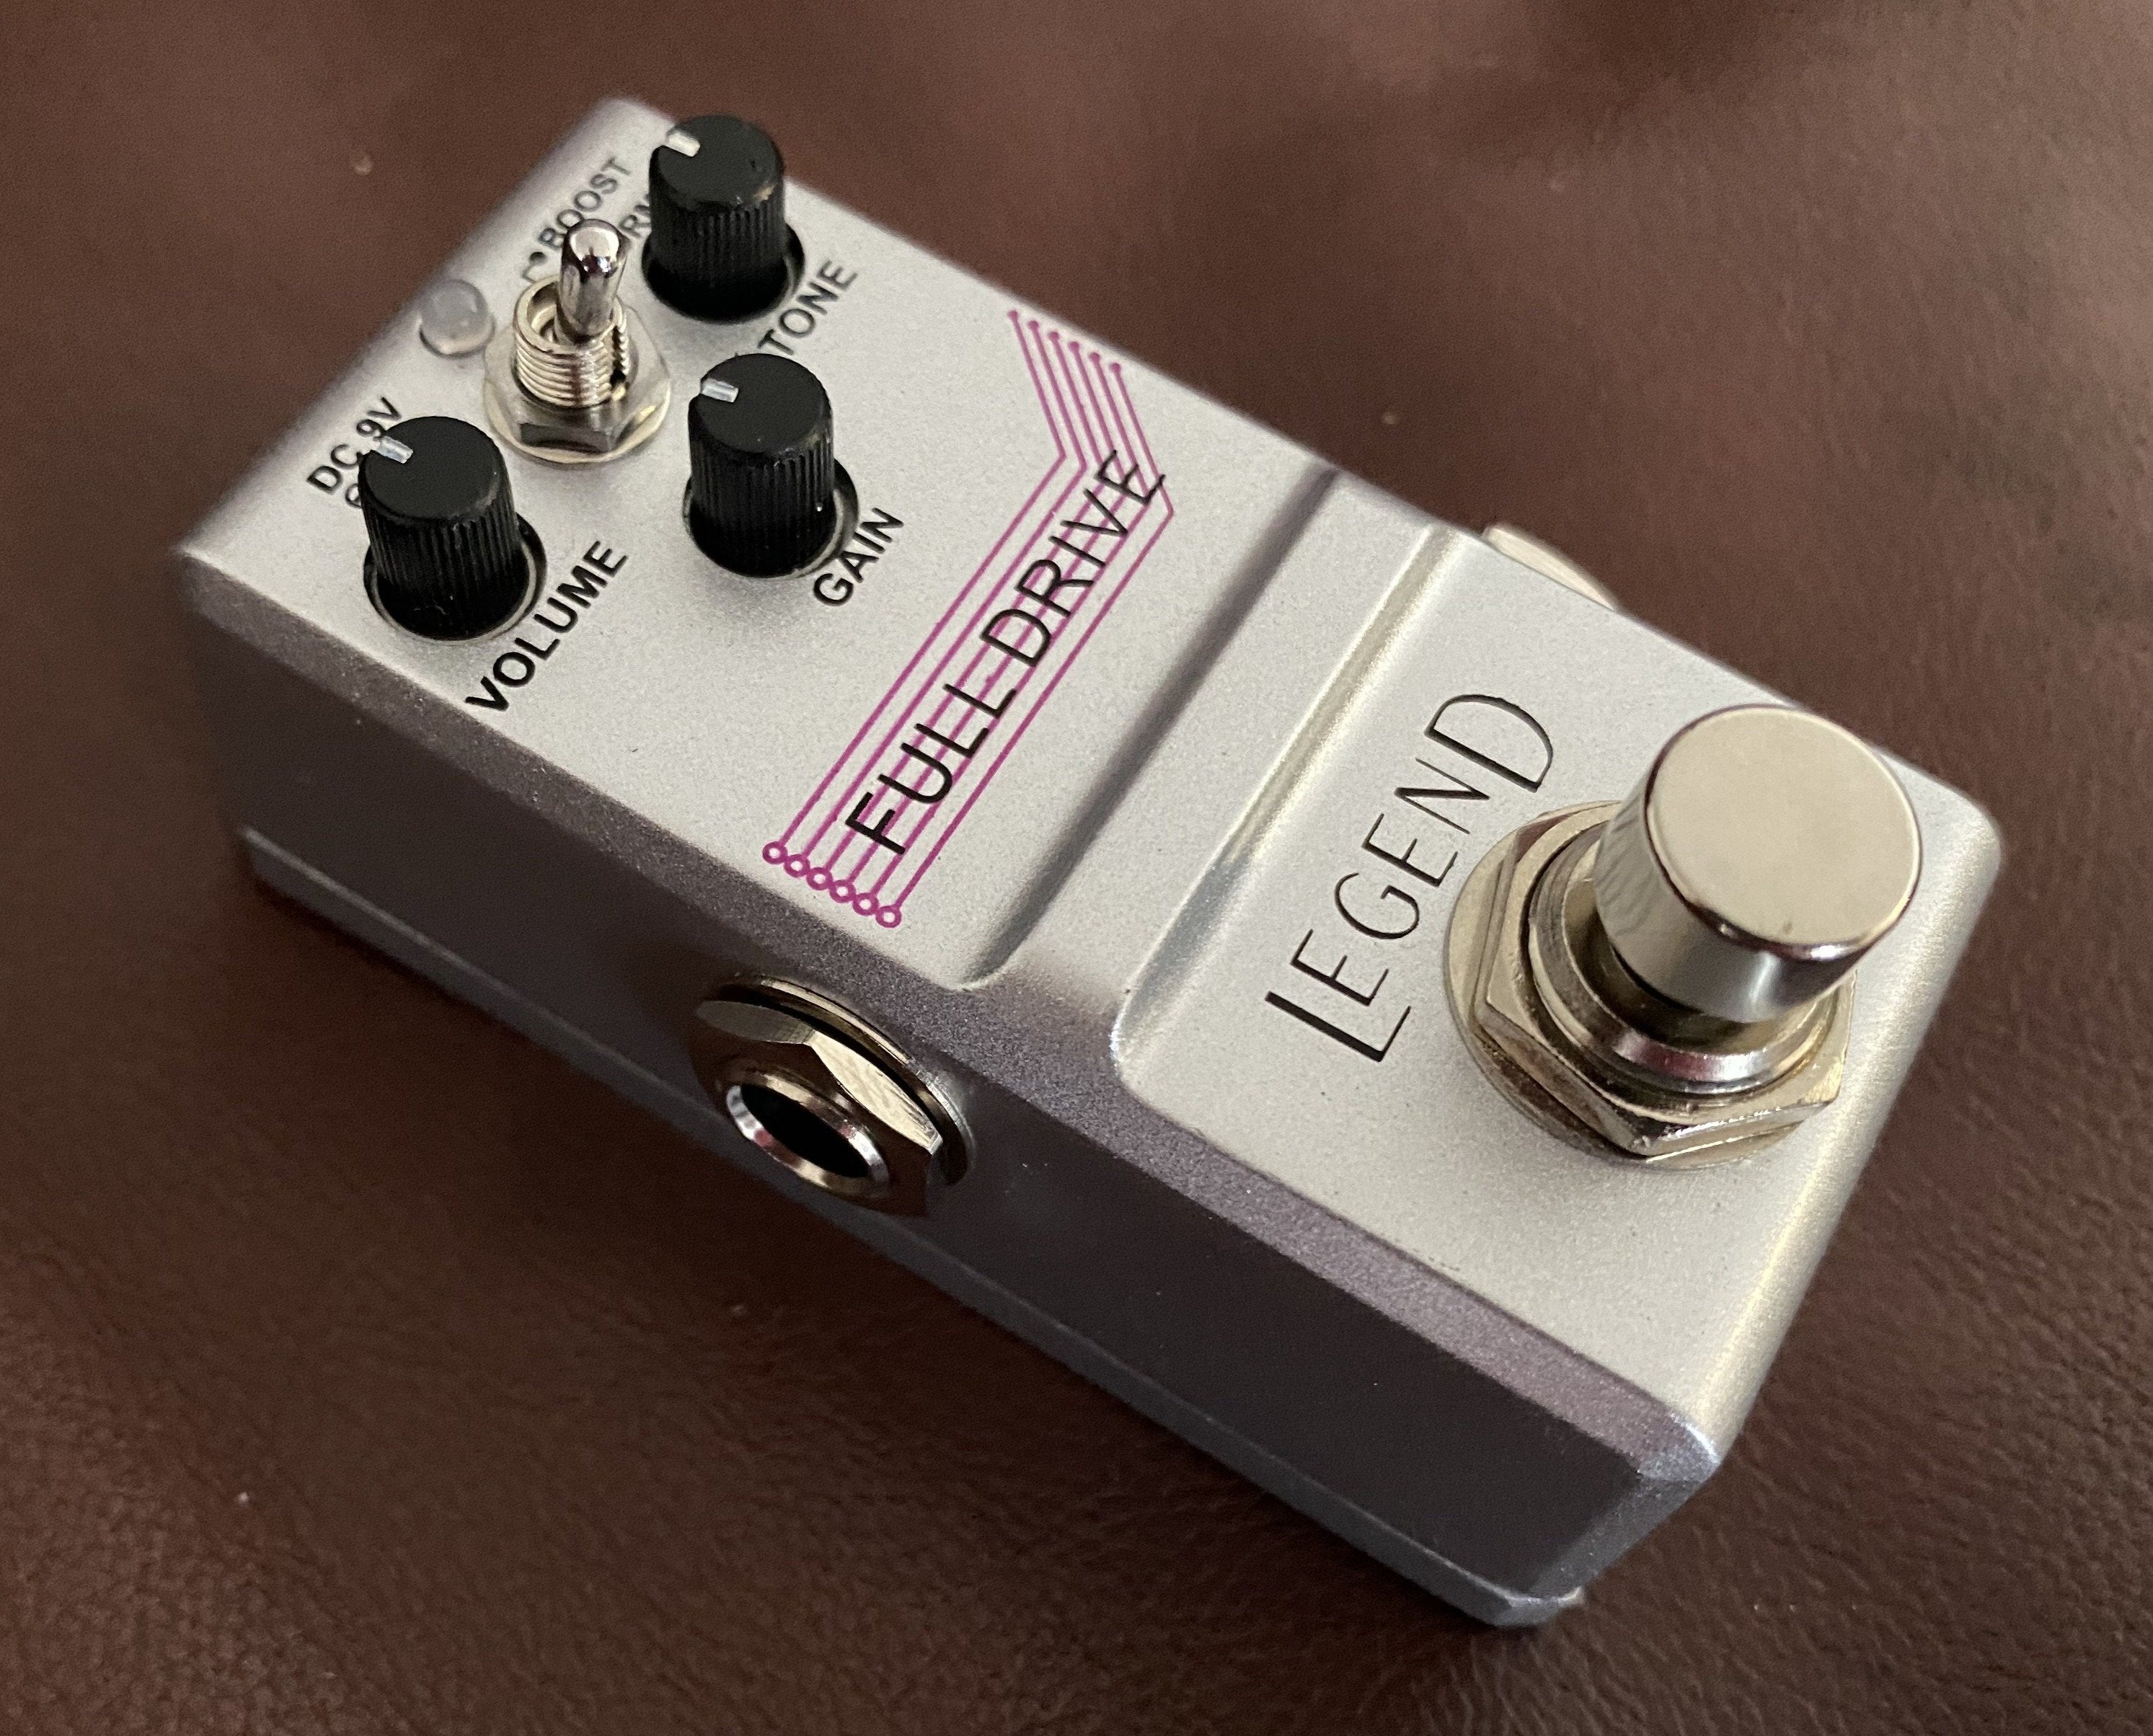 SMJ LEGEND Series Full Drive Pedal, Accessory for sale at Richards Guitars.